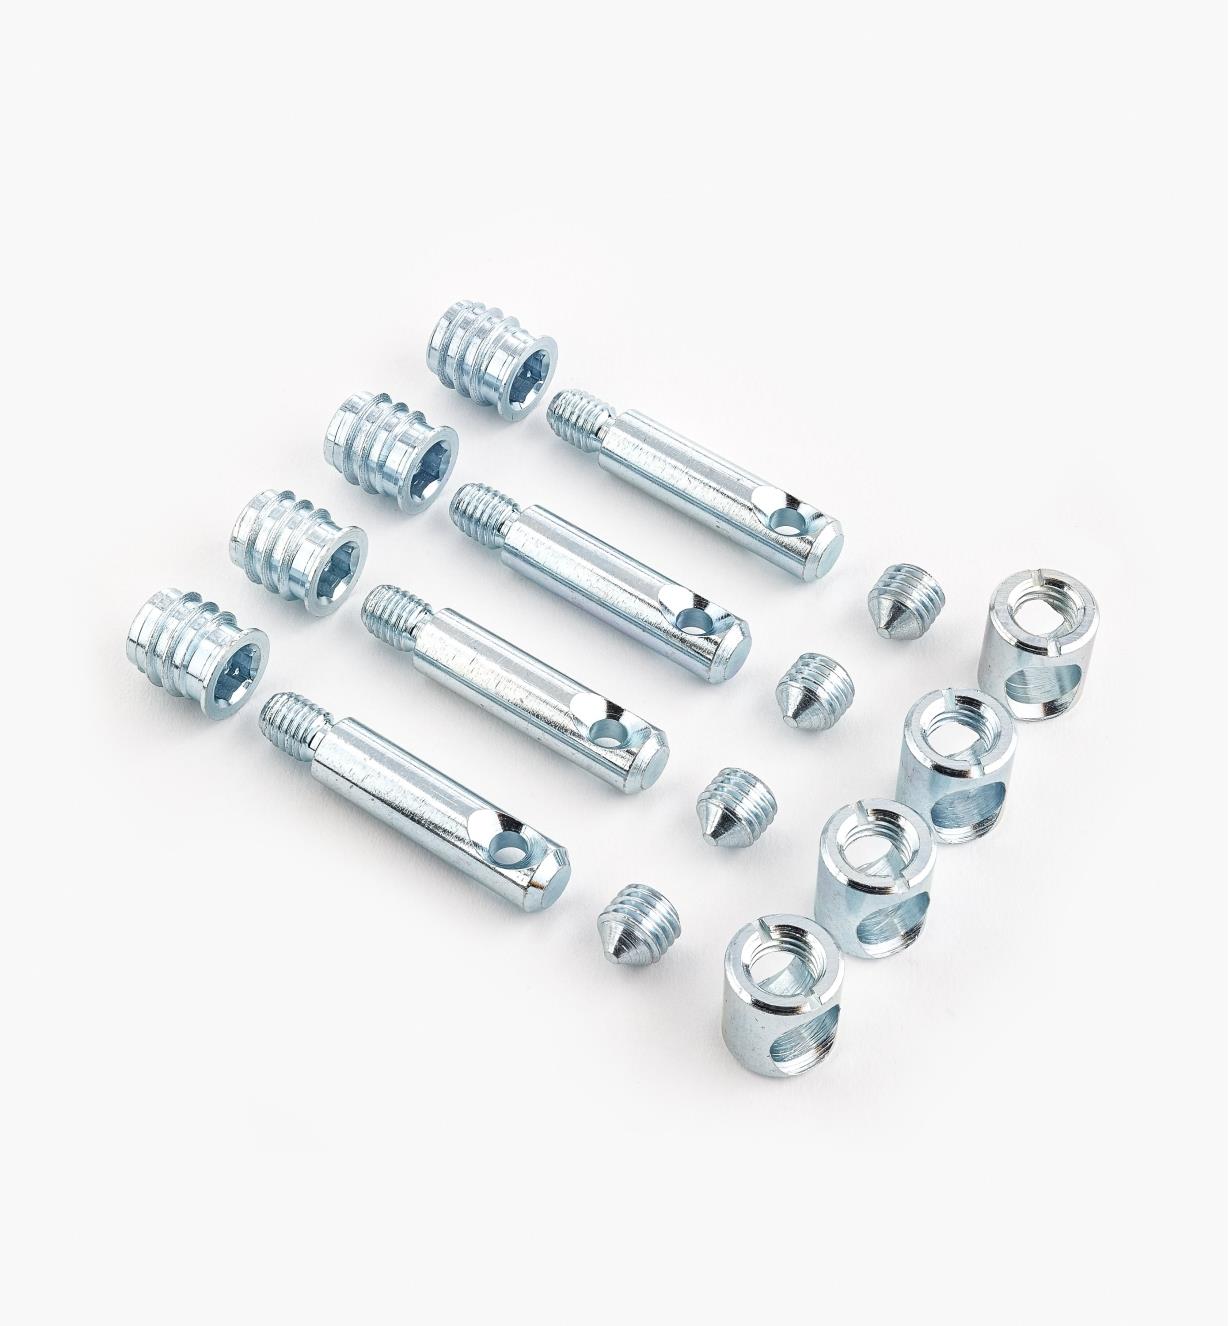 00D7920 - Quick-Connect Fittings, pkg. of 4